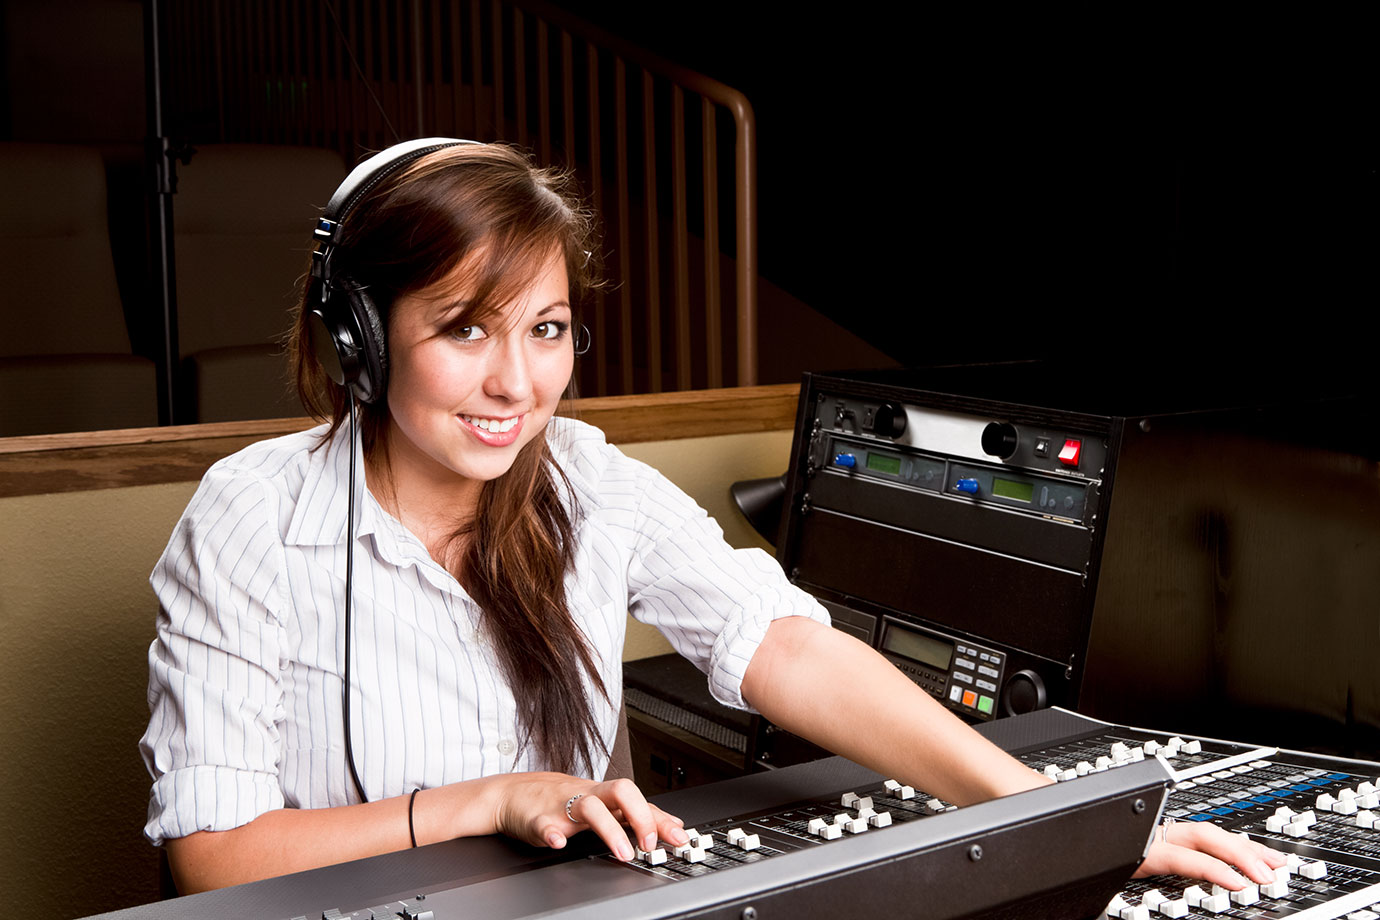 A person wearing headphones sits in front of a mixing console while smiling.